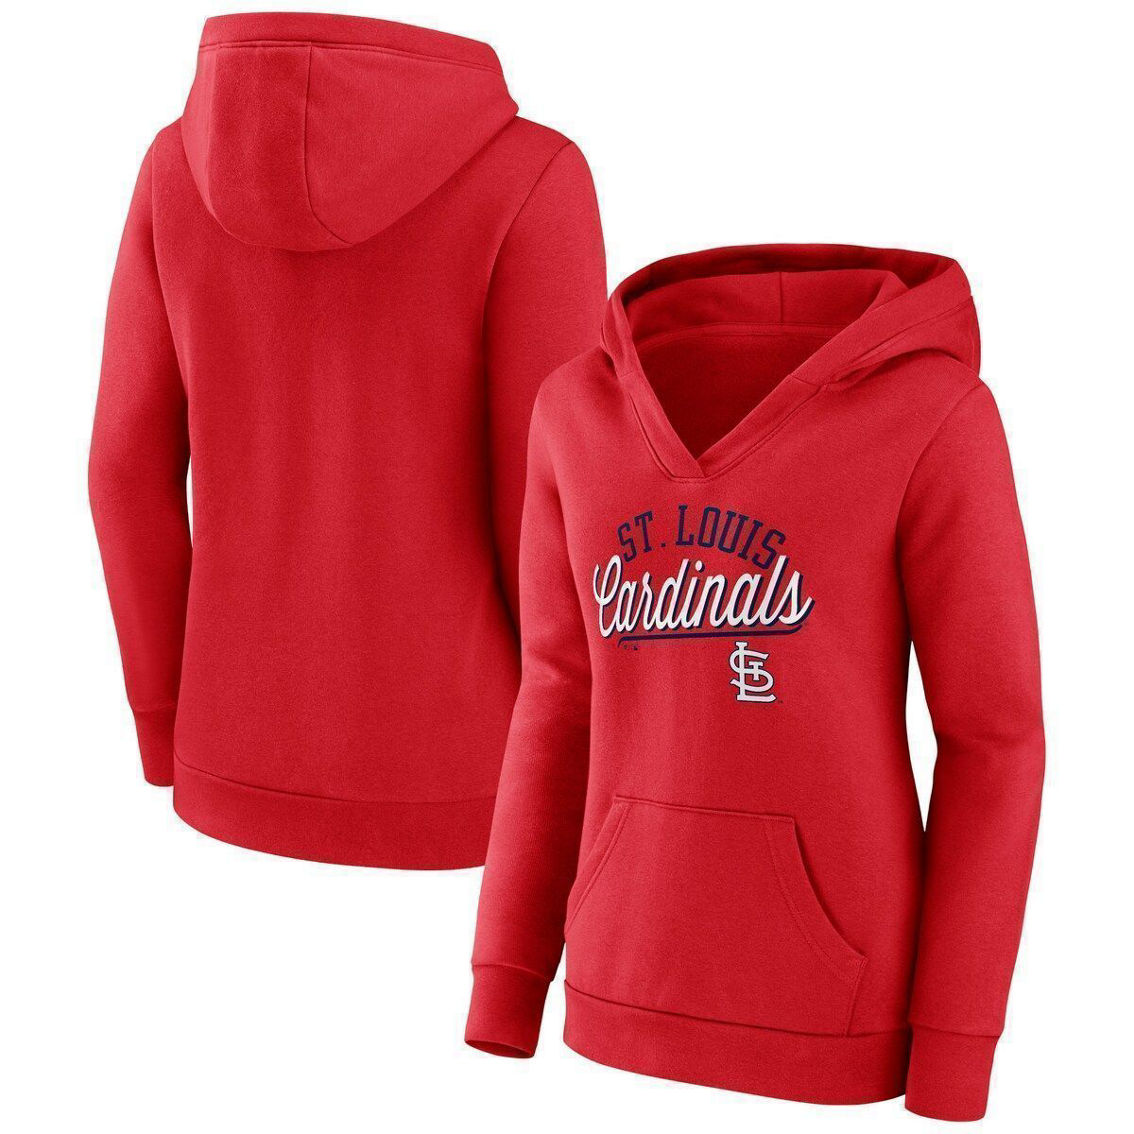 Fanatics Branded Women's Red St. Louis Cardinals Simplicity Crossover  V-neck Pullover Hoodie, Fan Shop